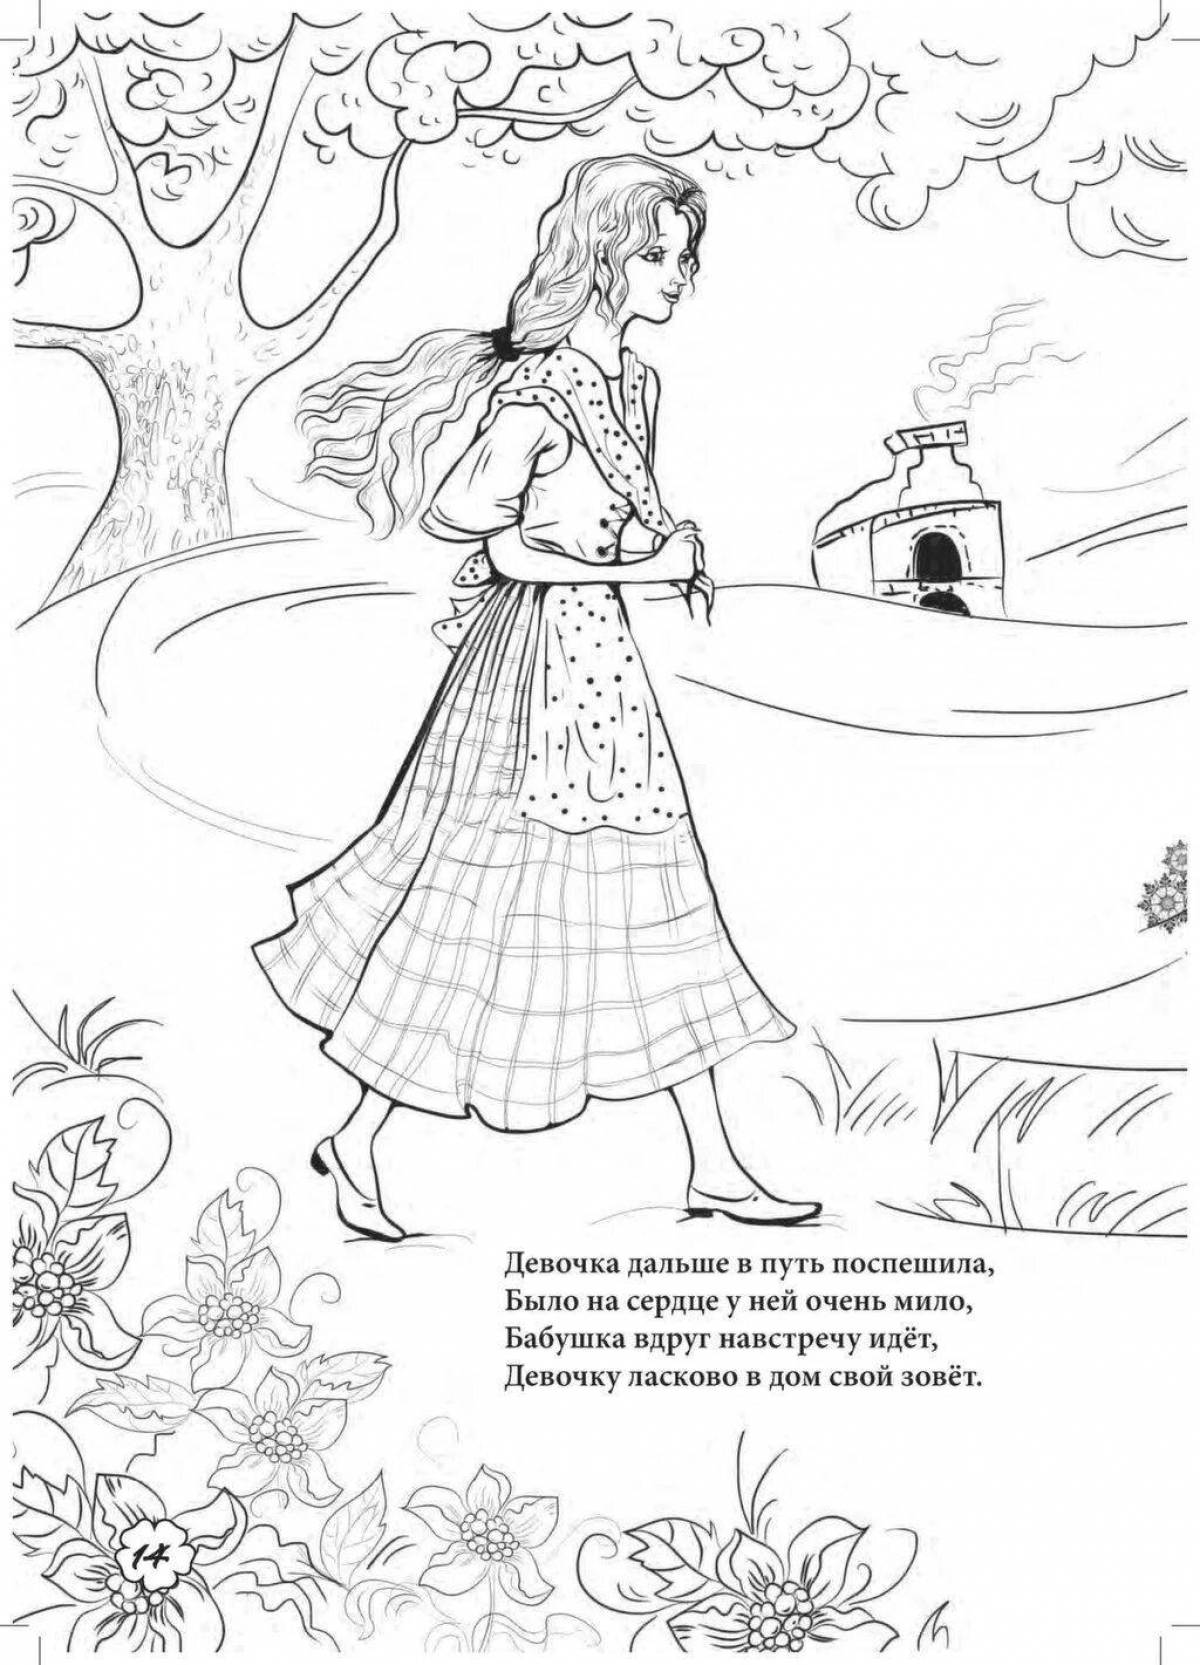 Grimm brothers amazing coloring page mistress of the blizzard